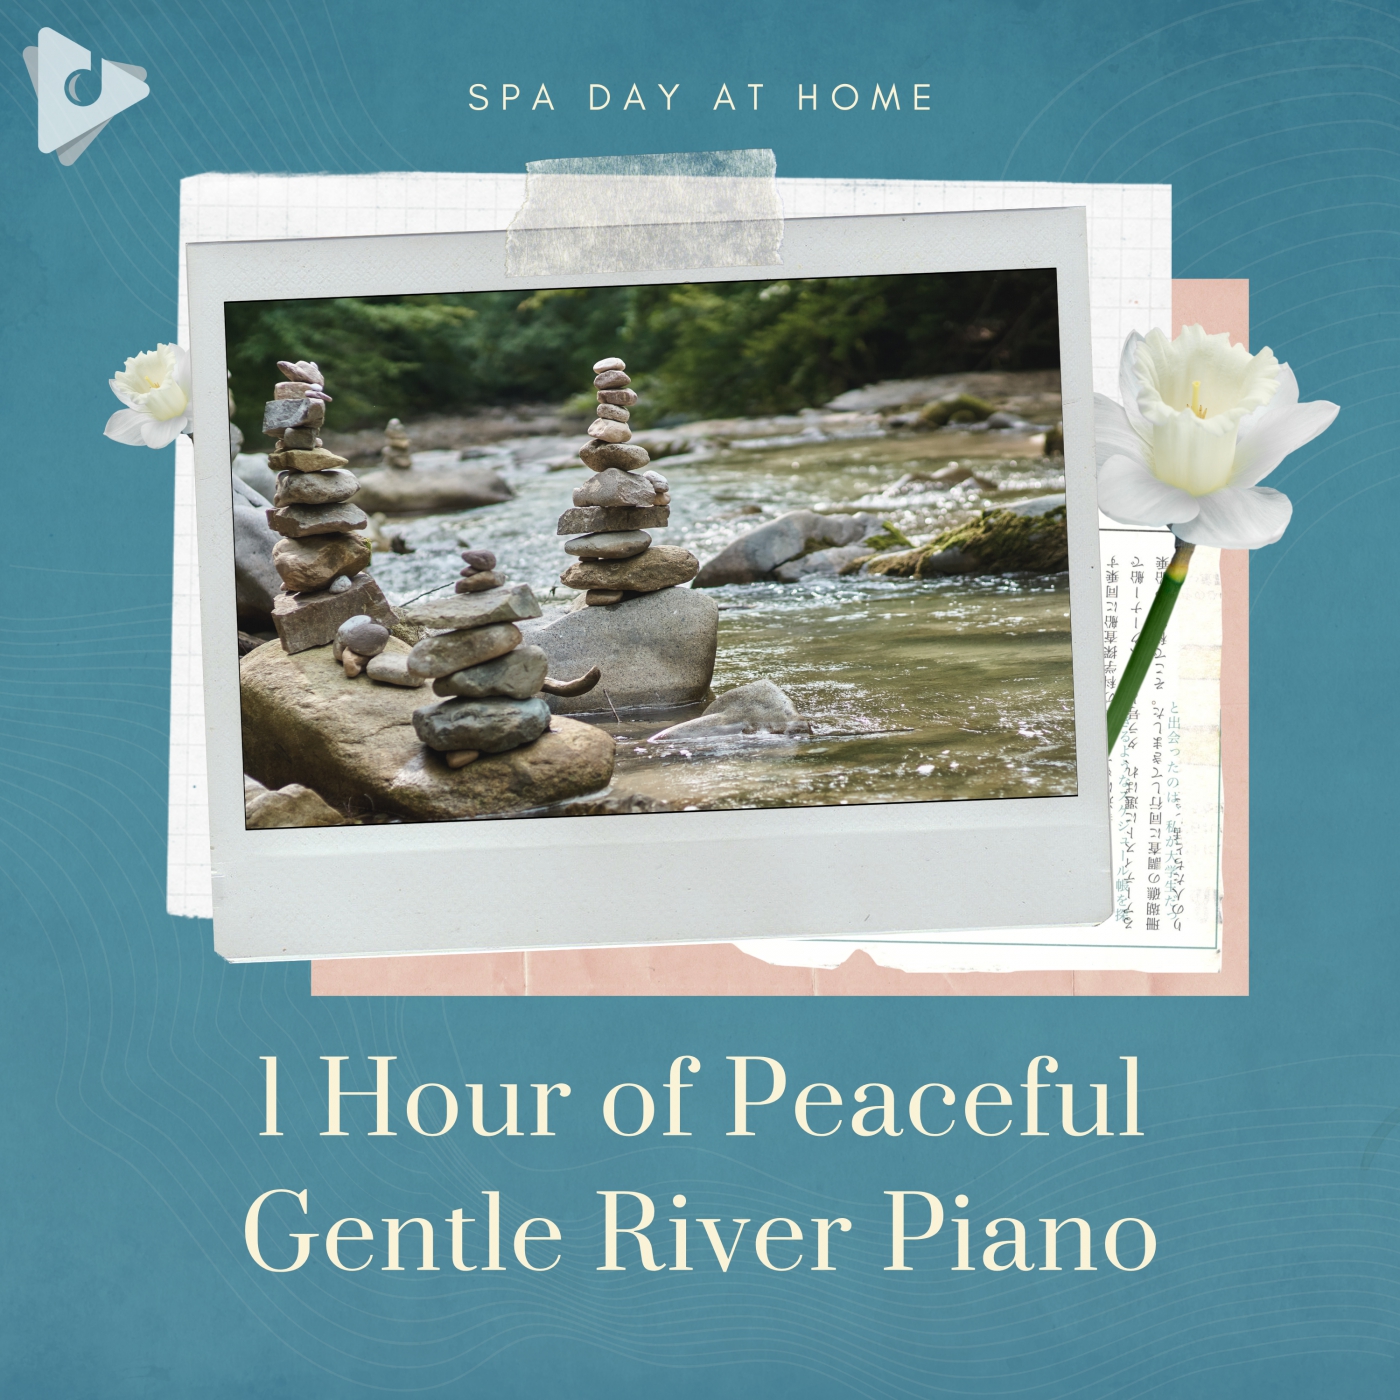 1 Hour of Peaceful Gentle River Piano